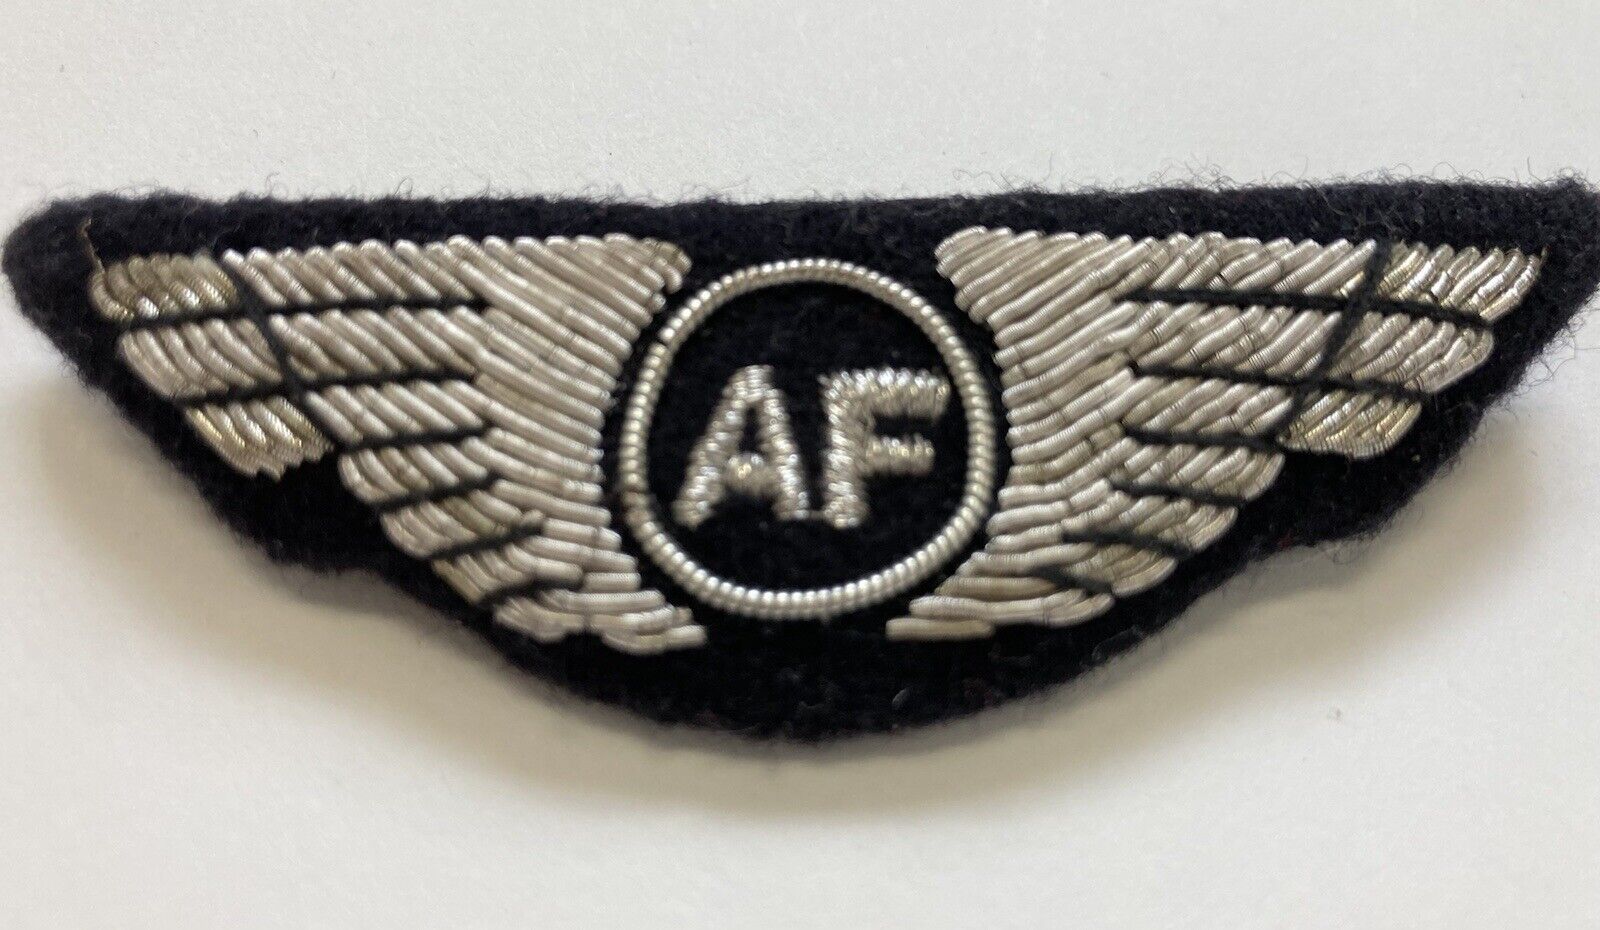 French Air France Flight Attendant Wings Badge. Unusual Design Fabric